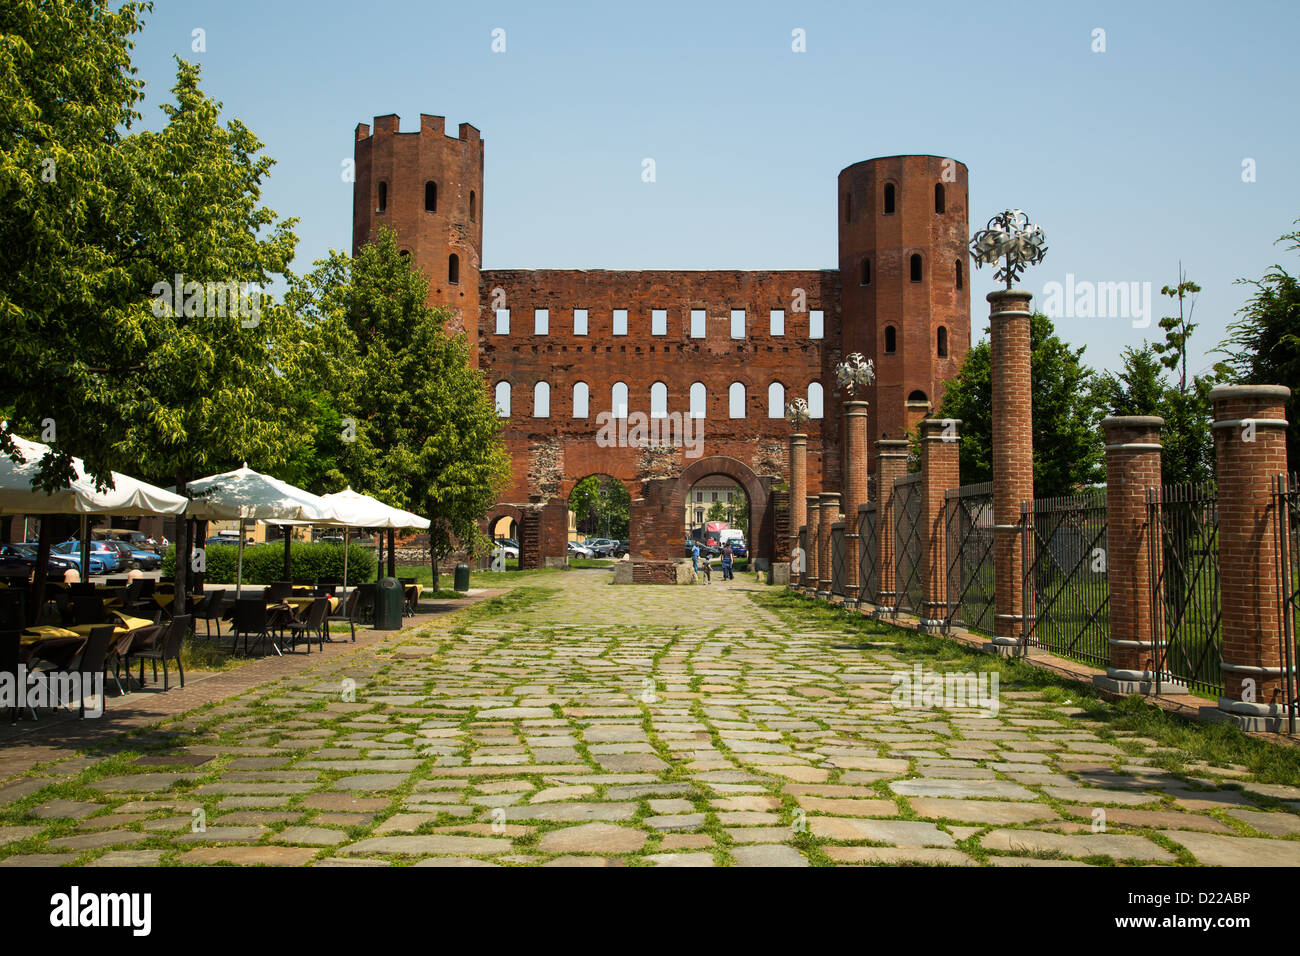 The Northern Roman Gate known as the Palatine Gate are part of Roman ruins in Turin Italy that date back to 25BC. Stock Photo